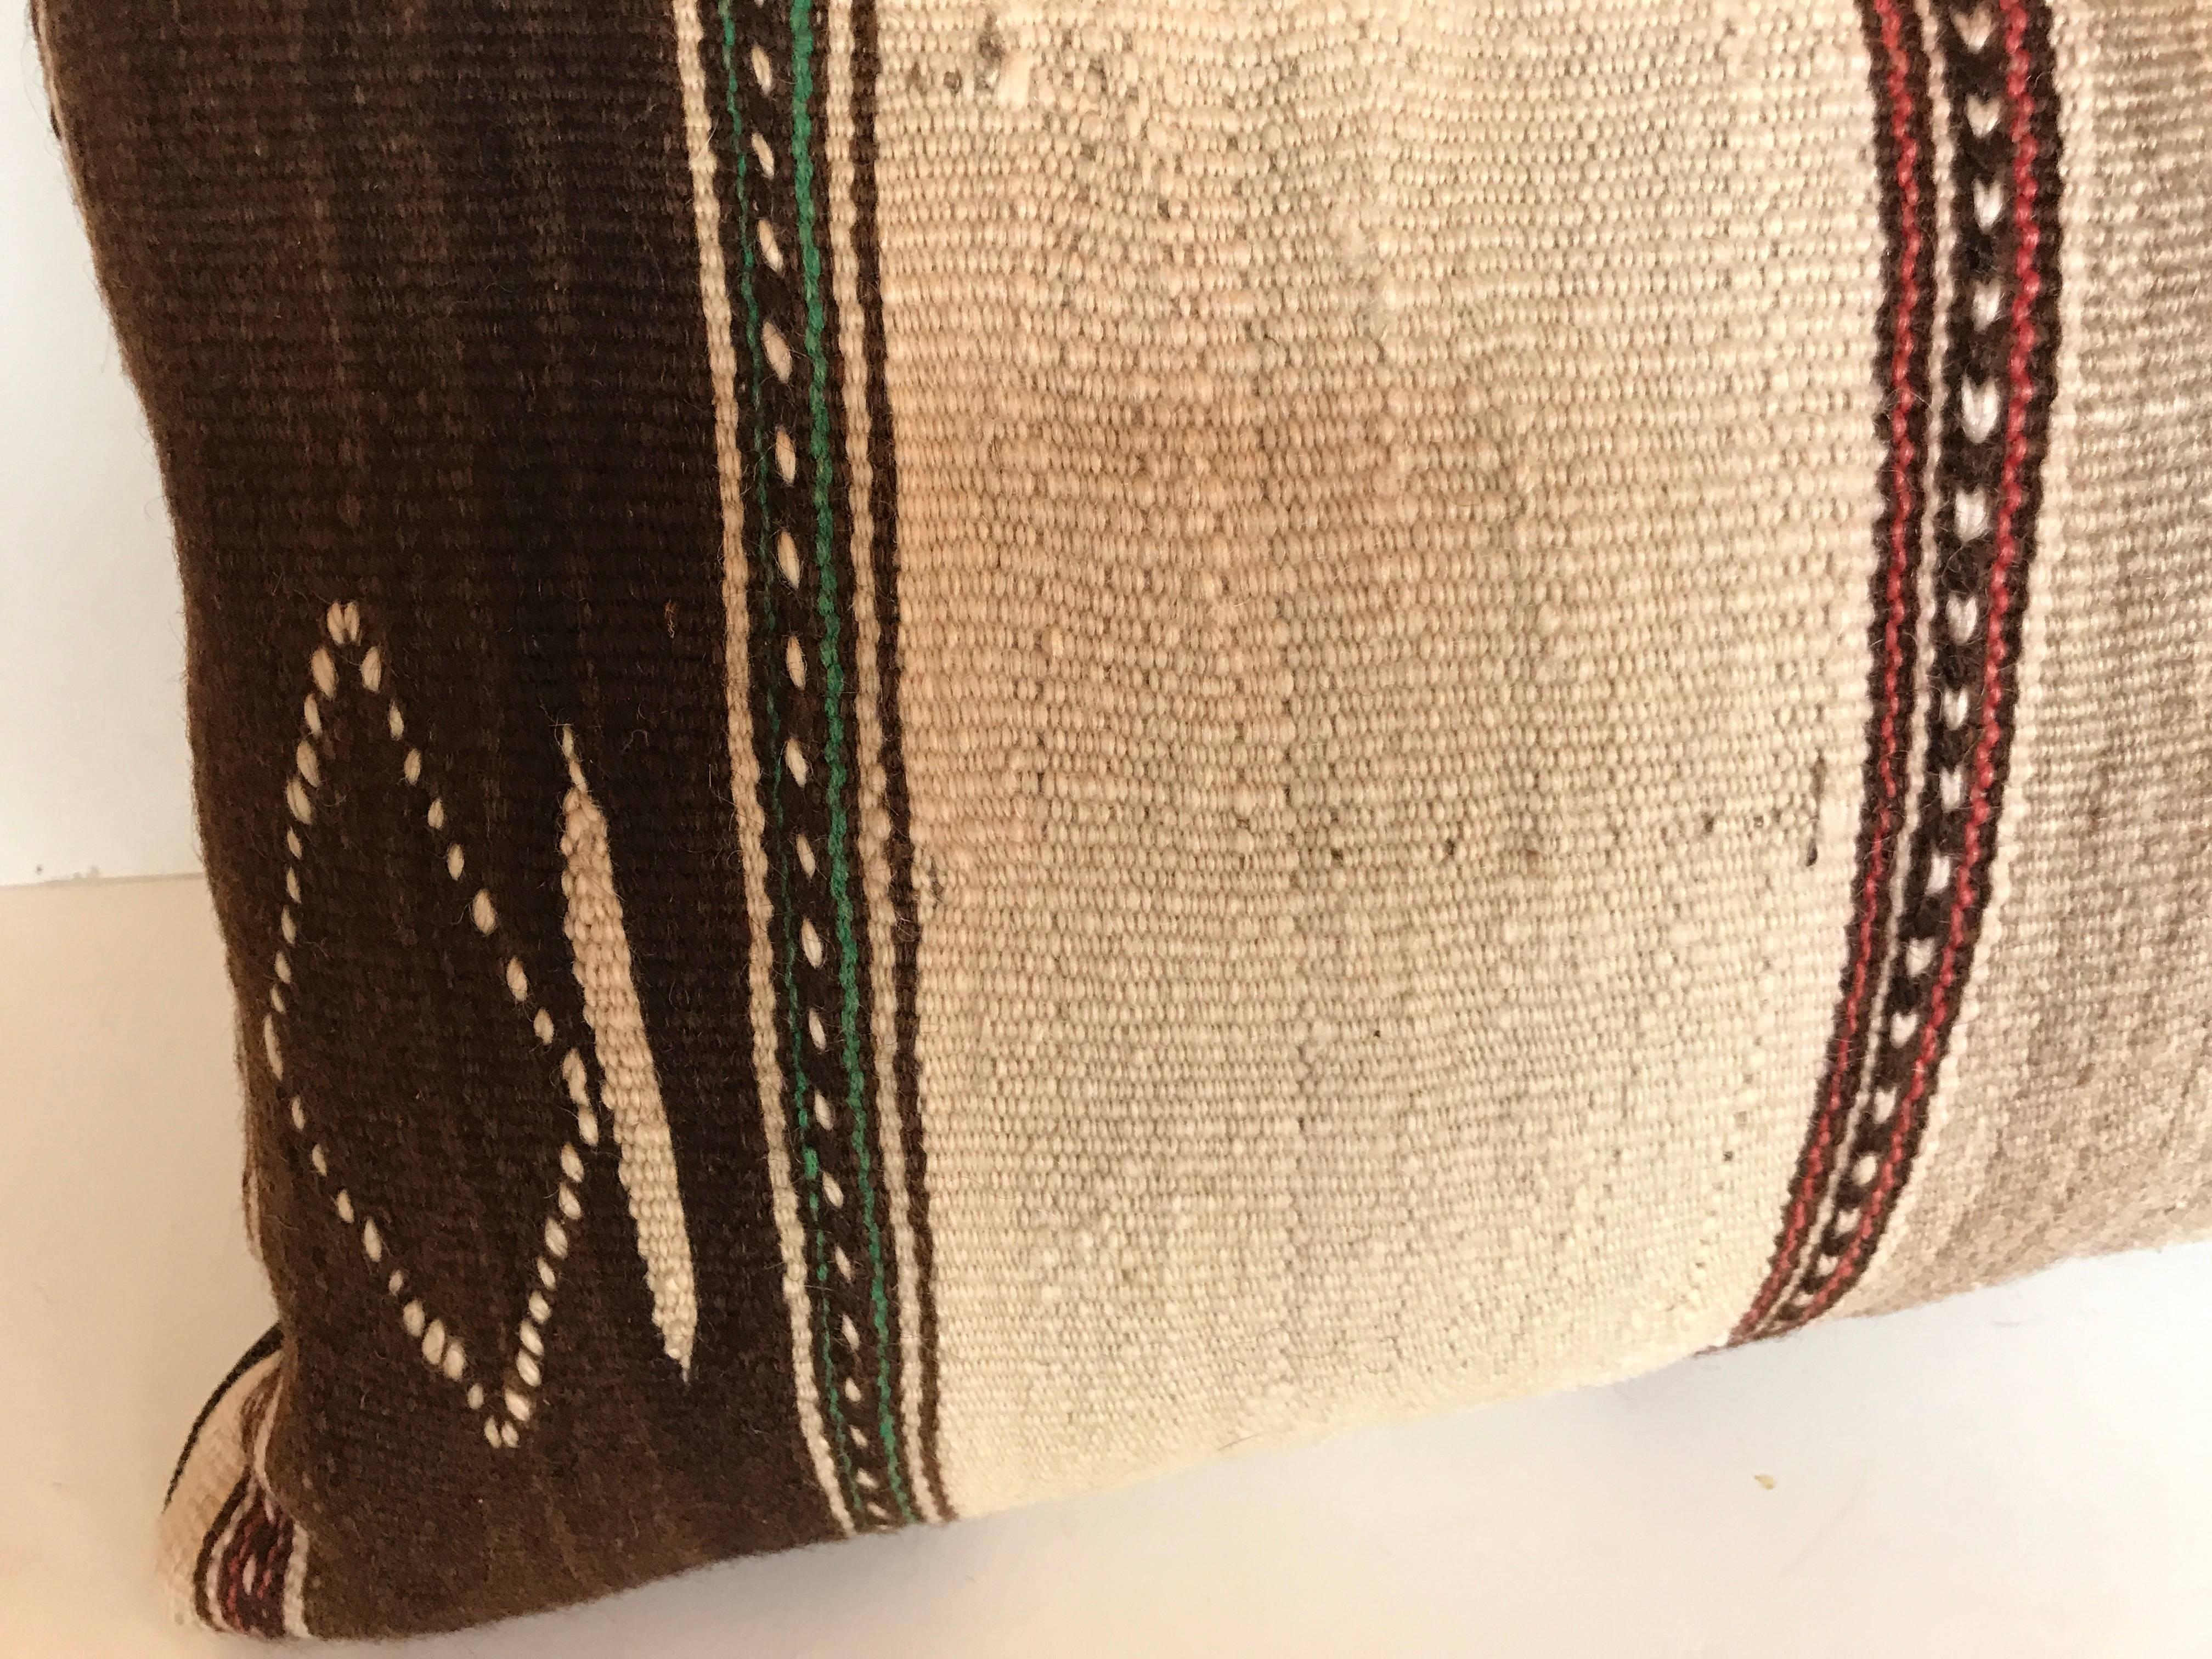 Custom pillow cut from a vintage hand loomed wool Moroccan Ourika rug made by the Berber tribes of the Upper Atlas Mountains.  Wool is soft and lustrous with natural colors.  Pillow is backed in a linen blend, filled with an insert of 100% down and